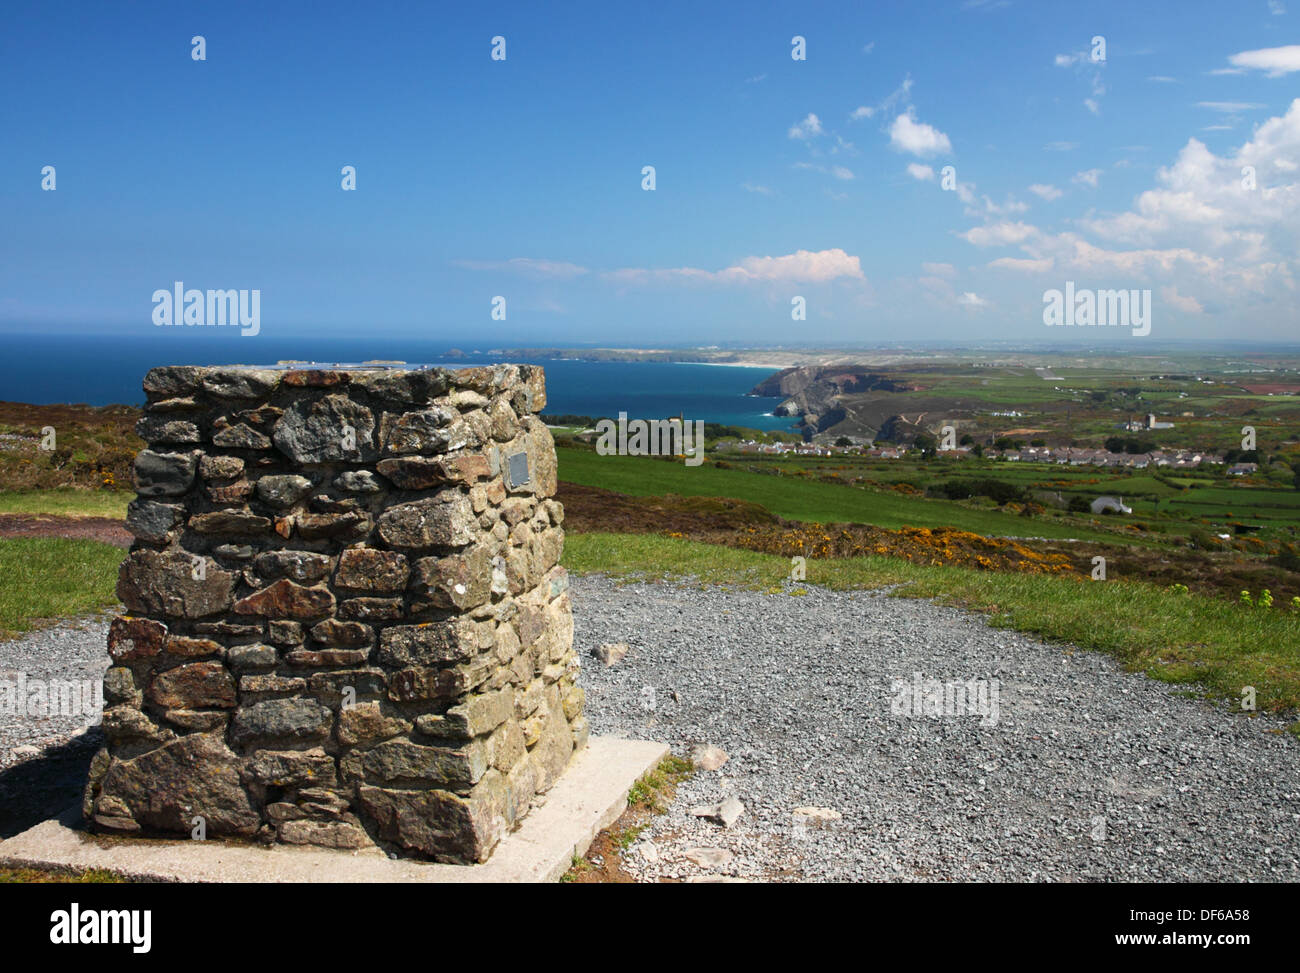 A stone cairn with coastal view in the distance. Stock Photo